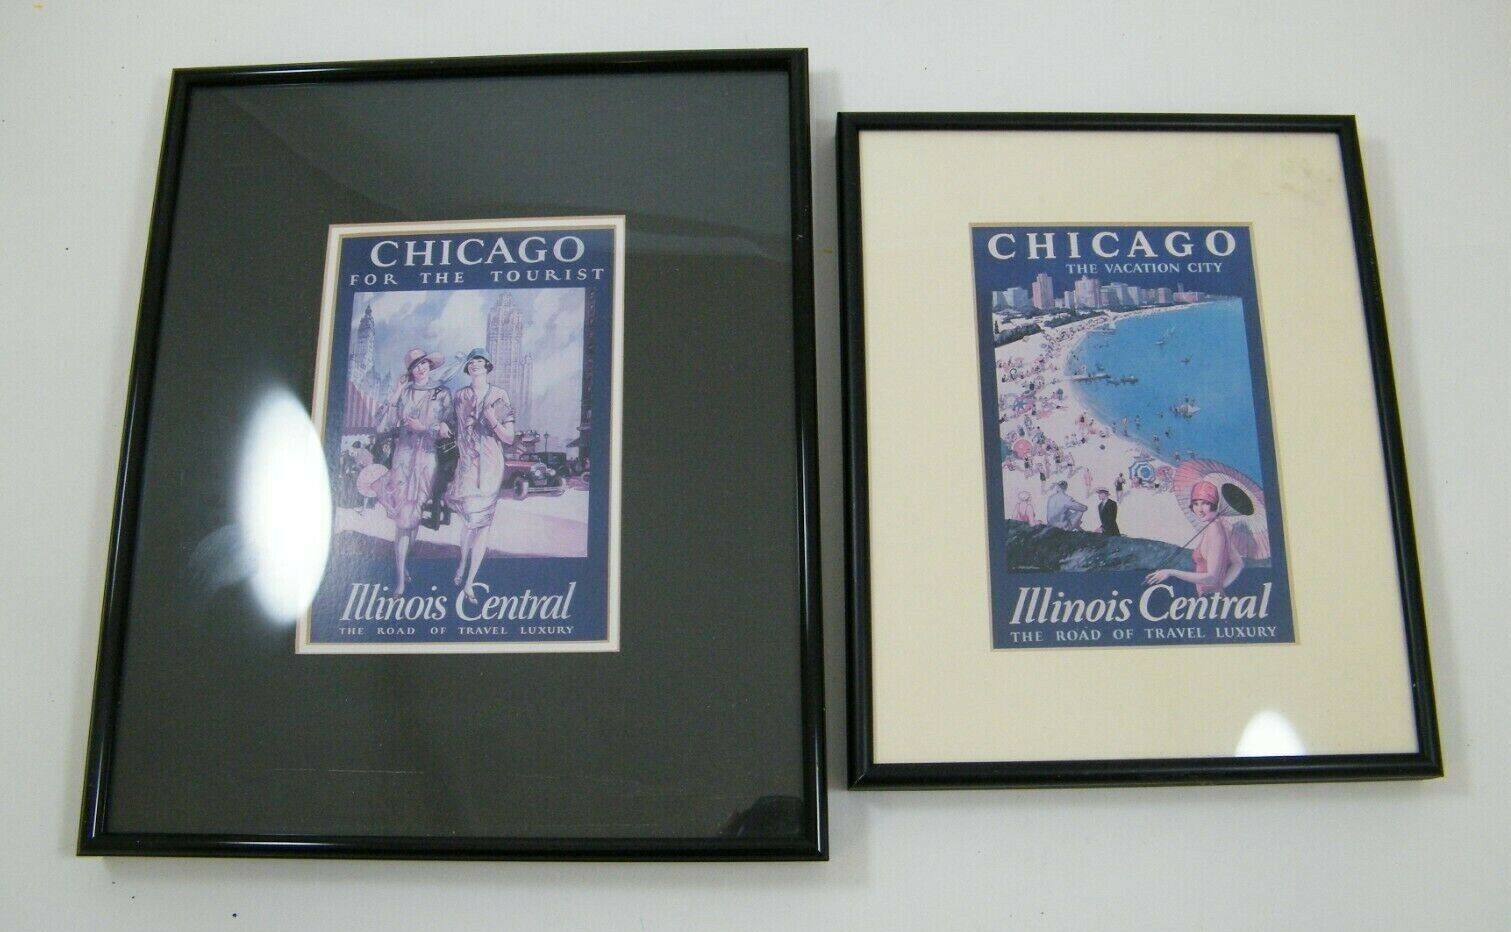 (2) CHICAGO ILLINOIS CENTRAL THE ROAD OF TRAVEL LUXURY FRAMED ART